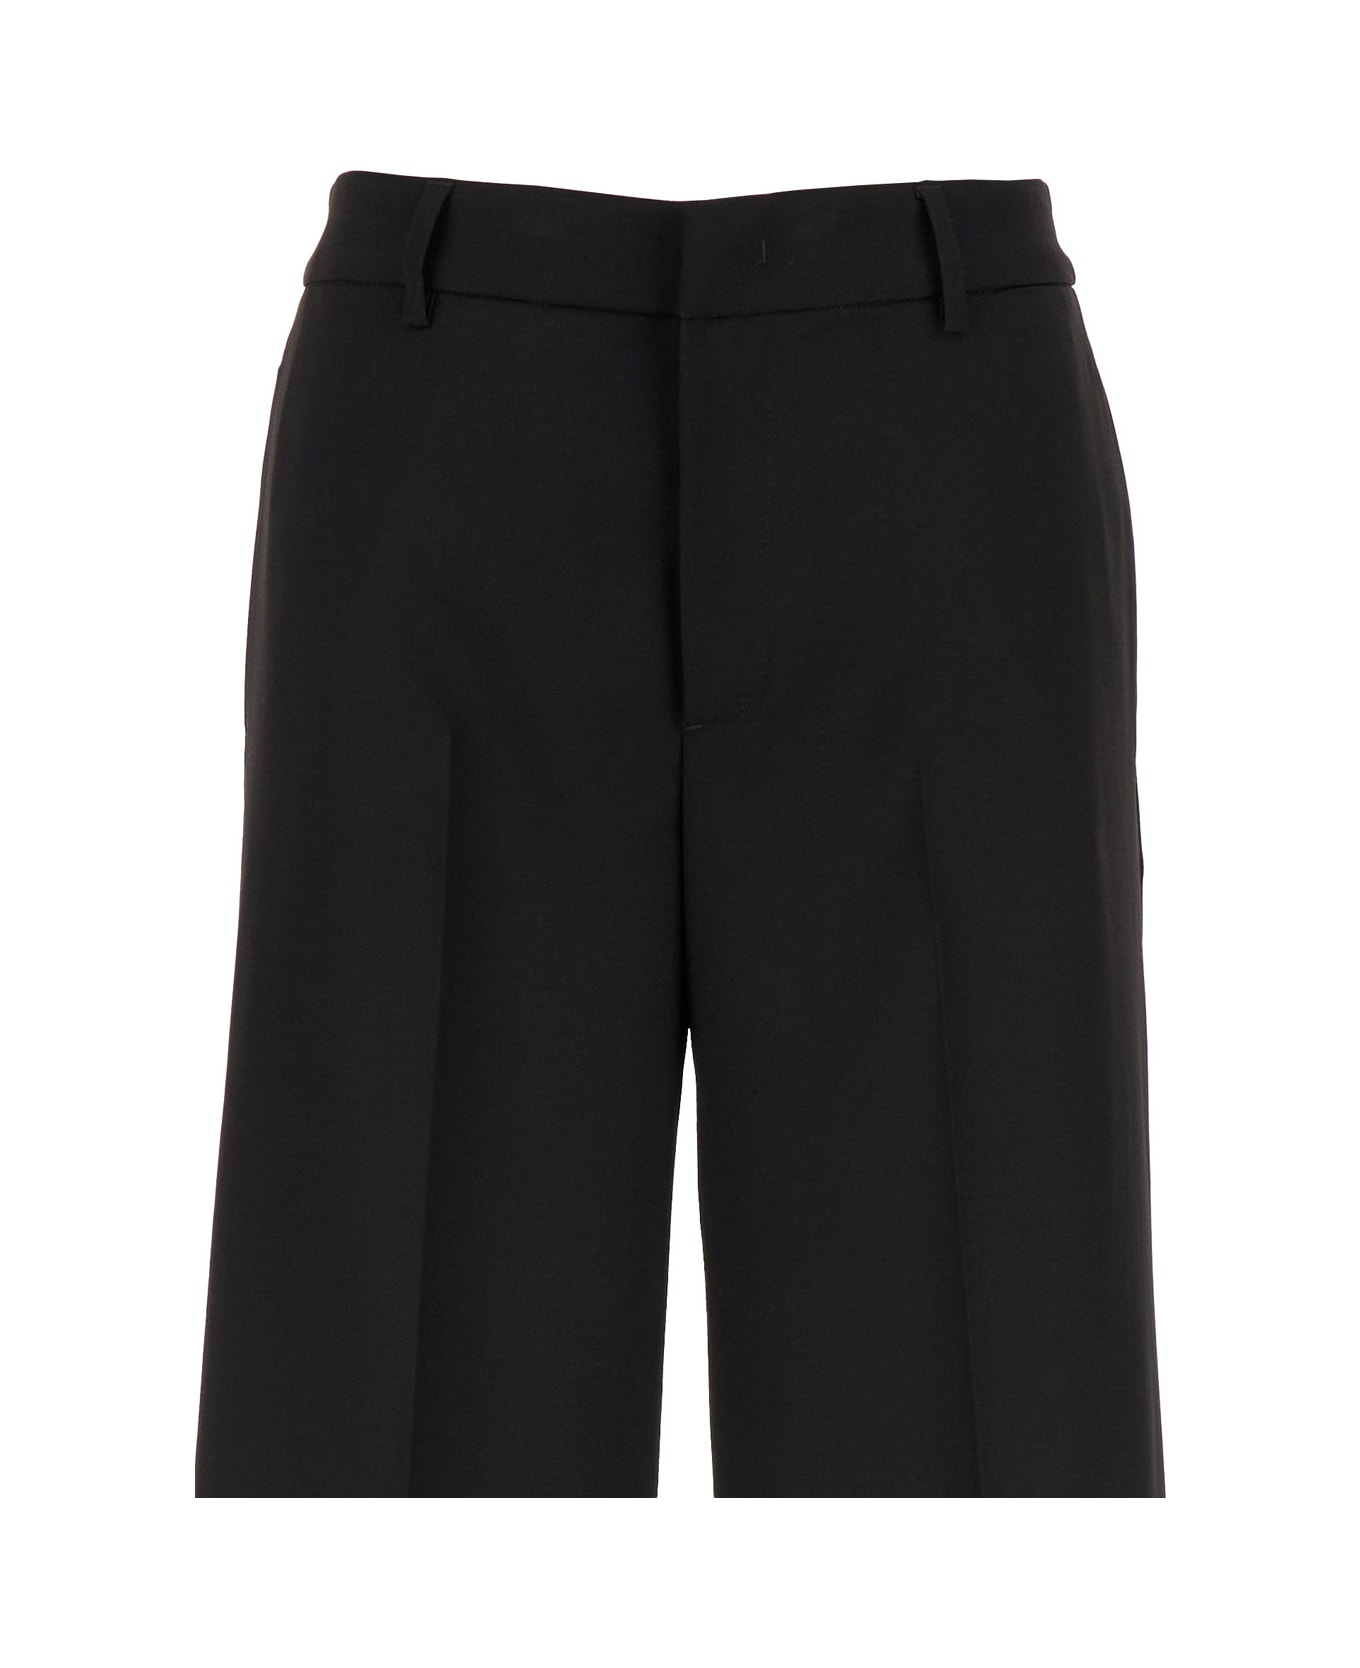 PT01 Tailored 'lorenza' High Waisted Black Trousers In Technical Fabric Woman - Black